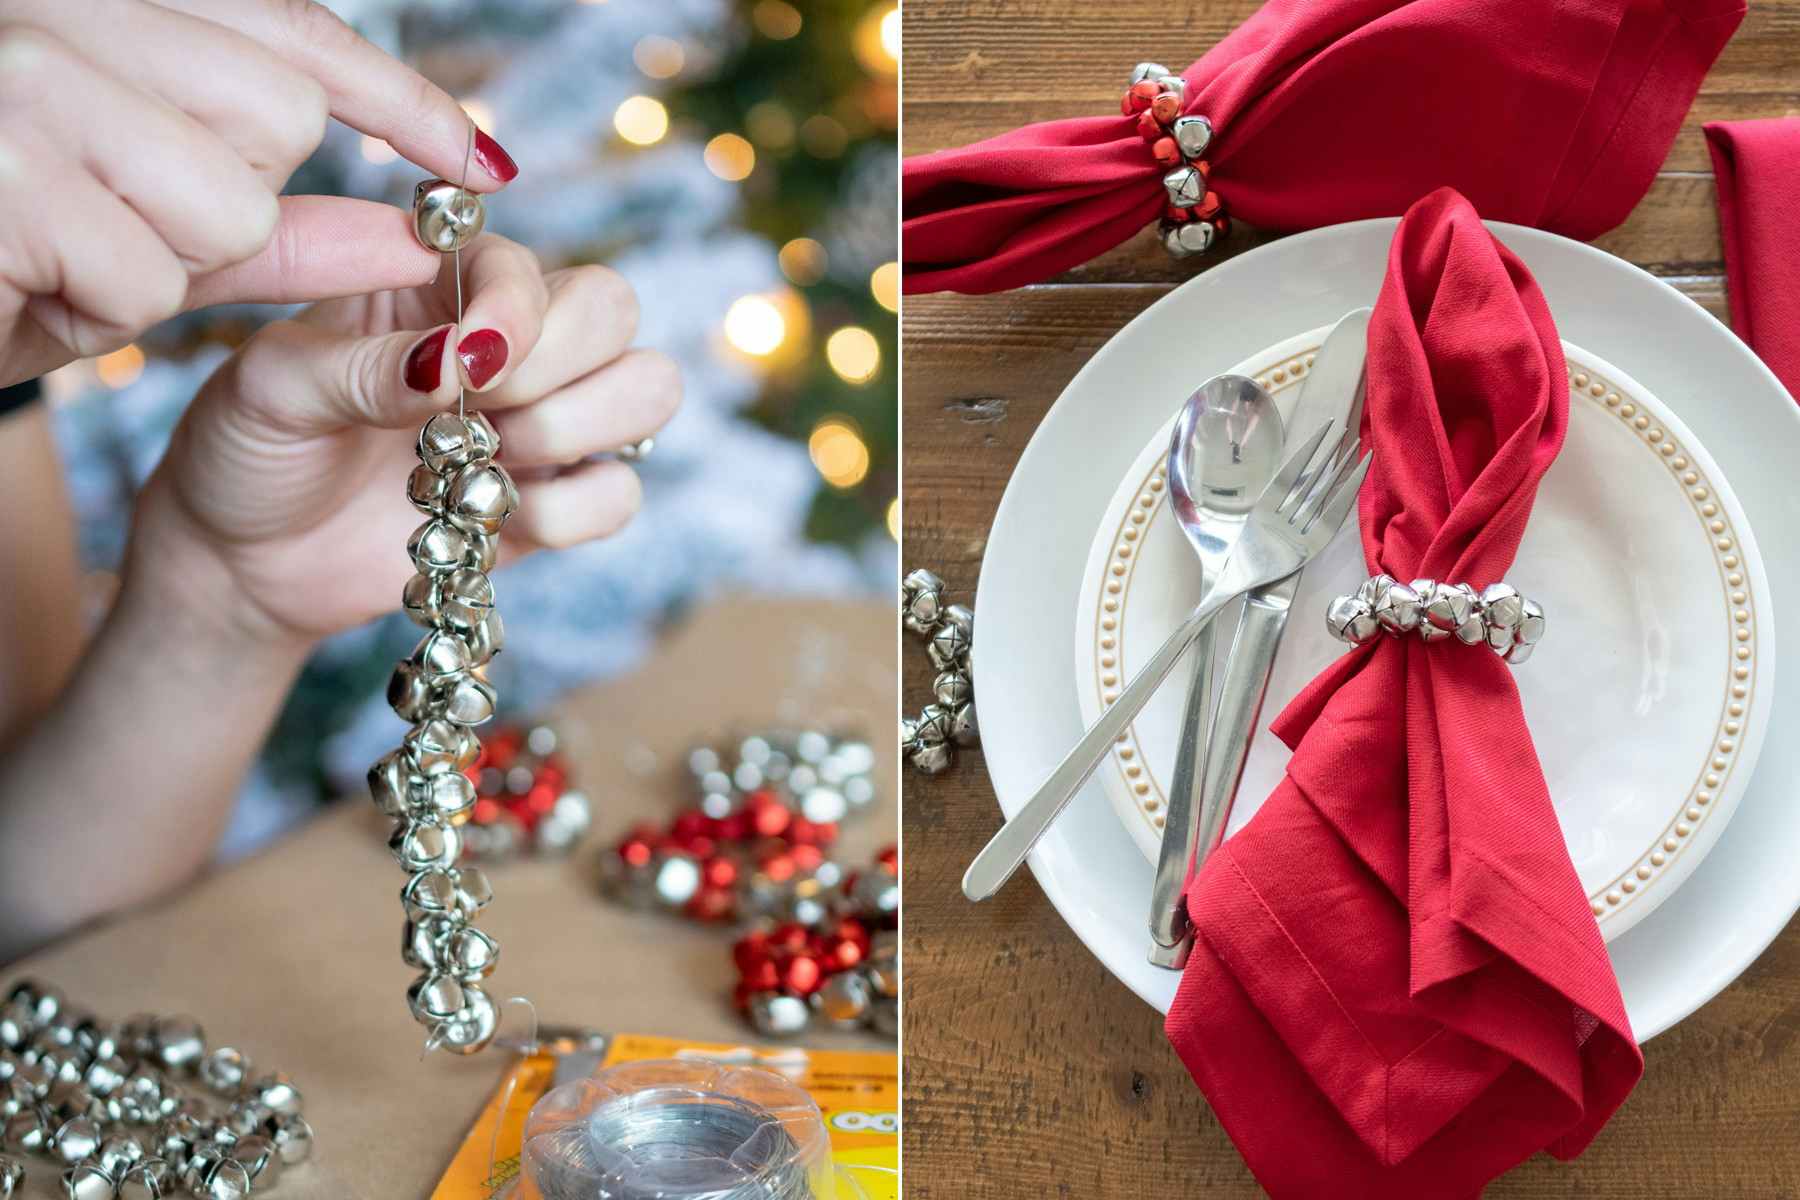 A person stringing jingle bells onto wire making a napkin ring.